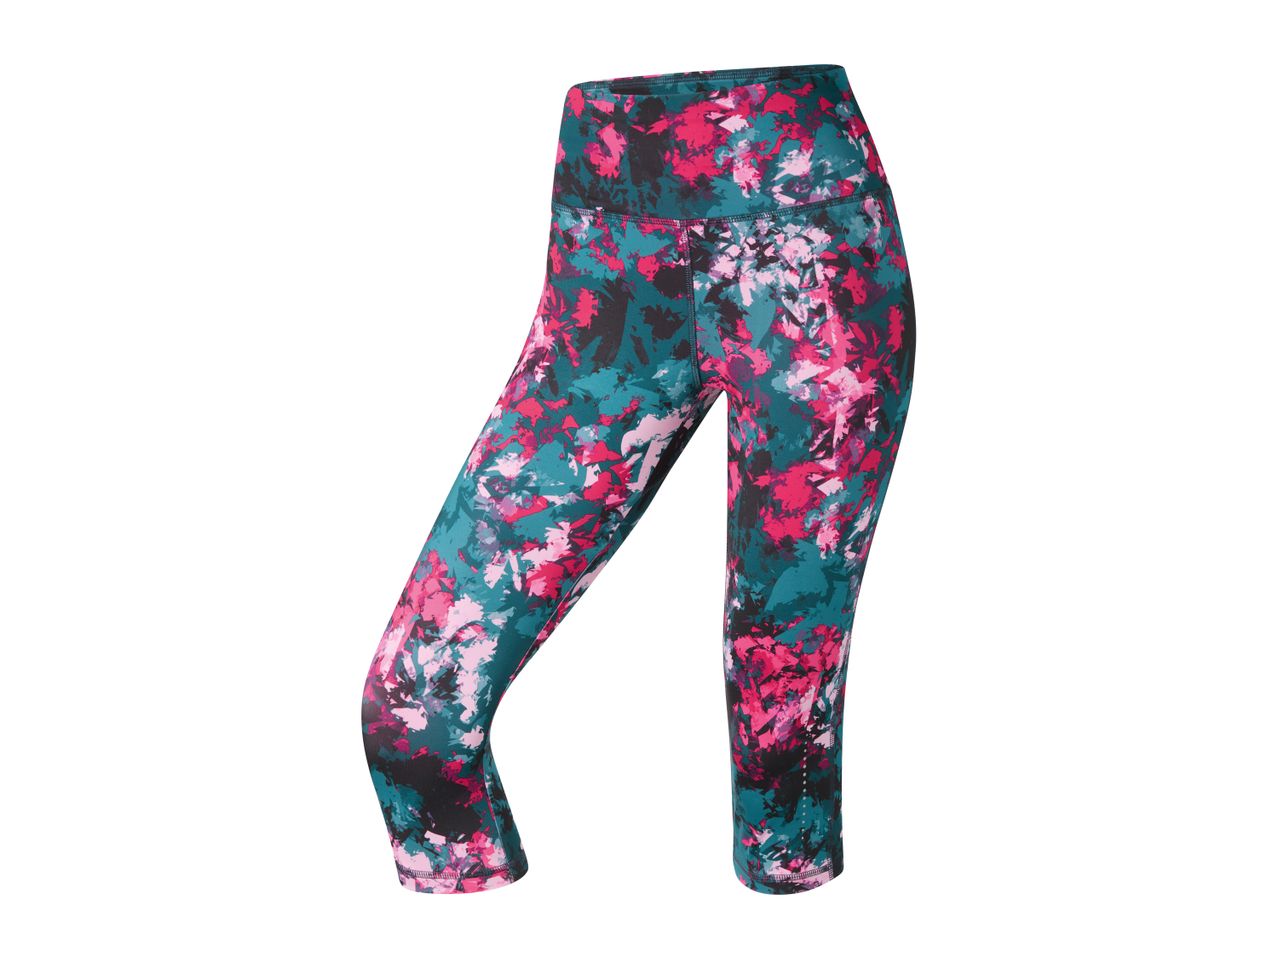 Go to full screen view: Crivit Ladies’ Cropped Sports Leggings - Image 1